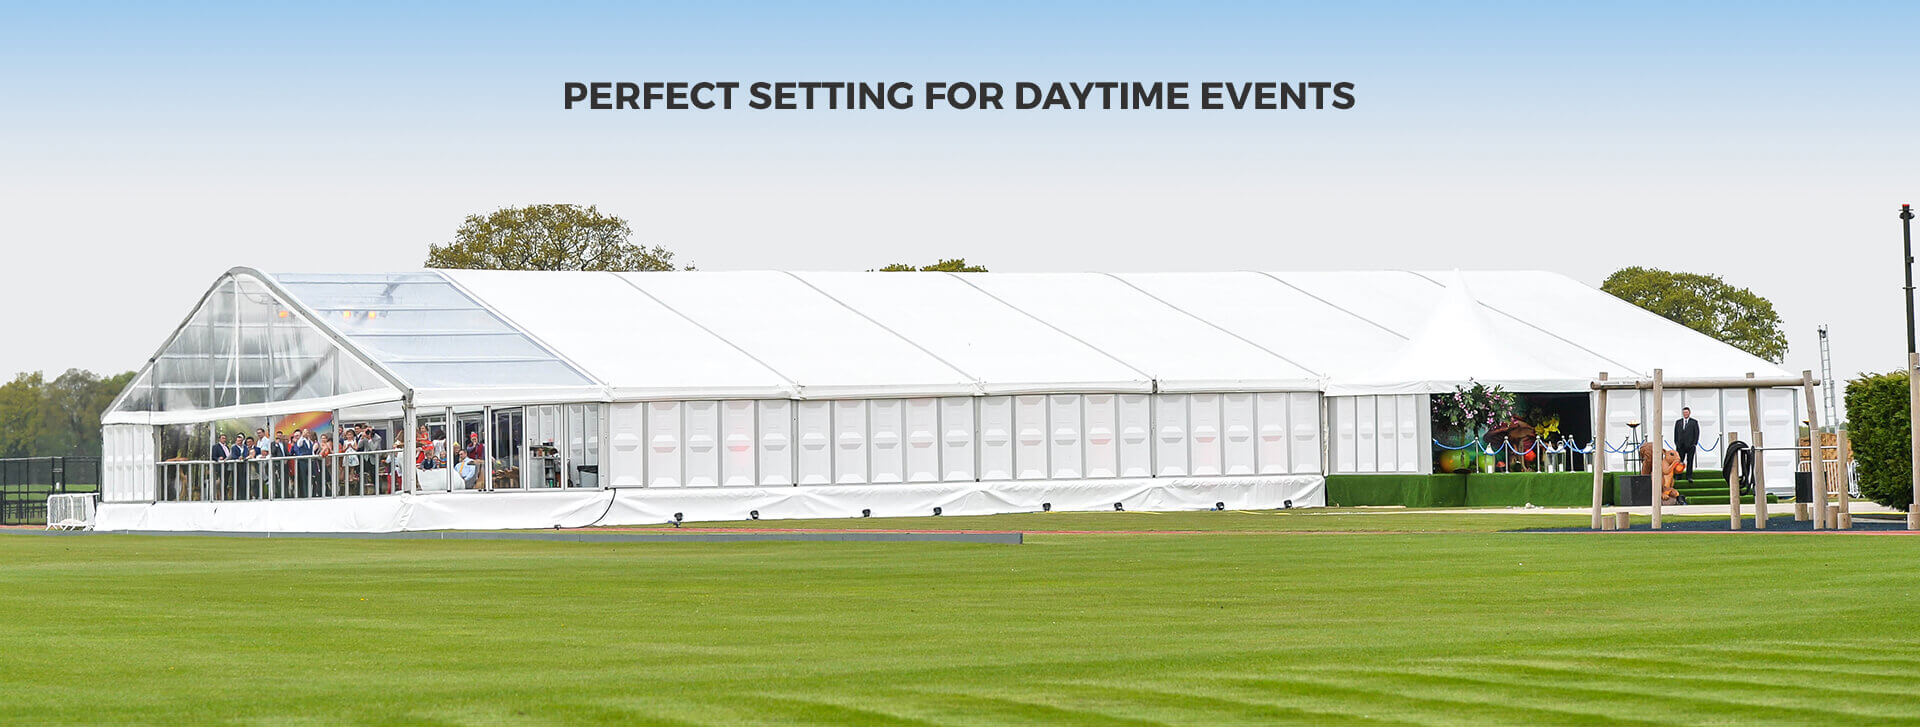 Marquee Hire in Birmingham, Marquee Hire in Nottinghamshire, Marquee Hire in derbyshire, Marquee Hire in Shropshire